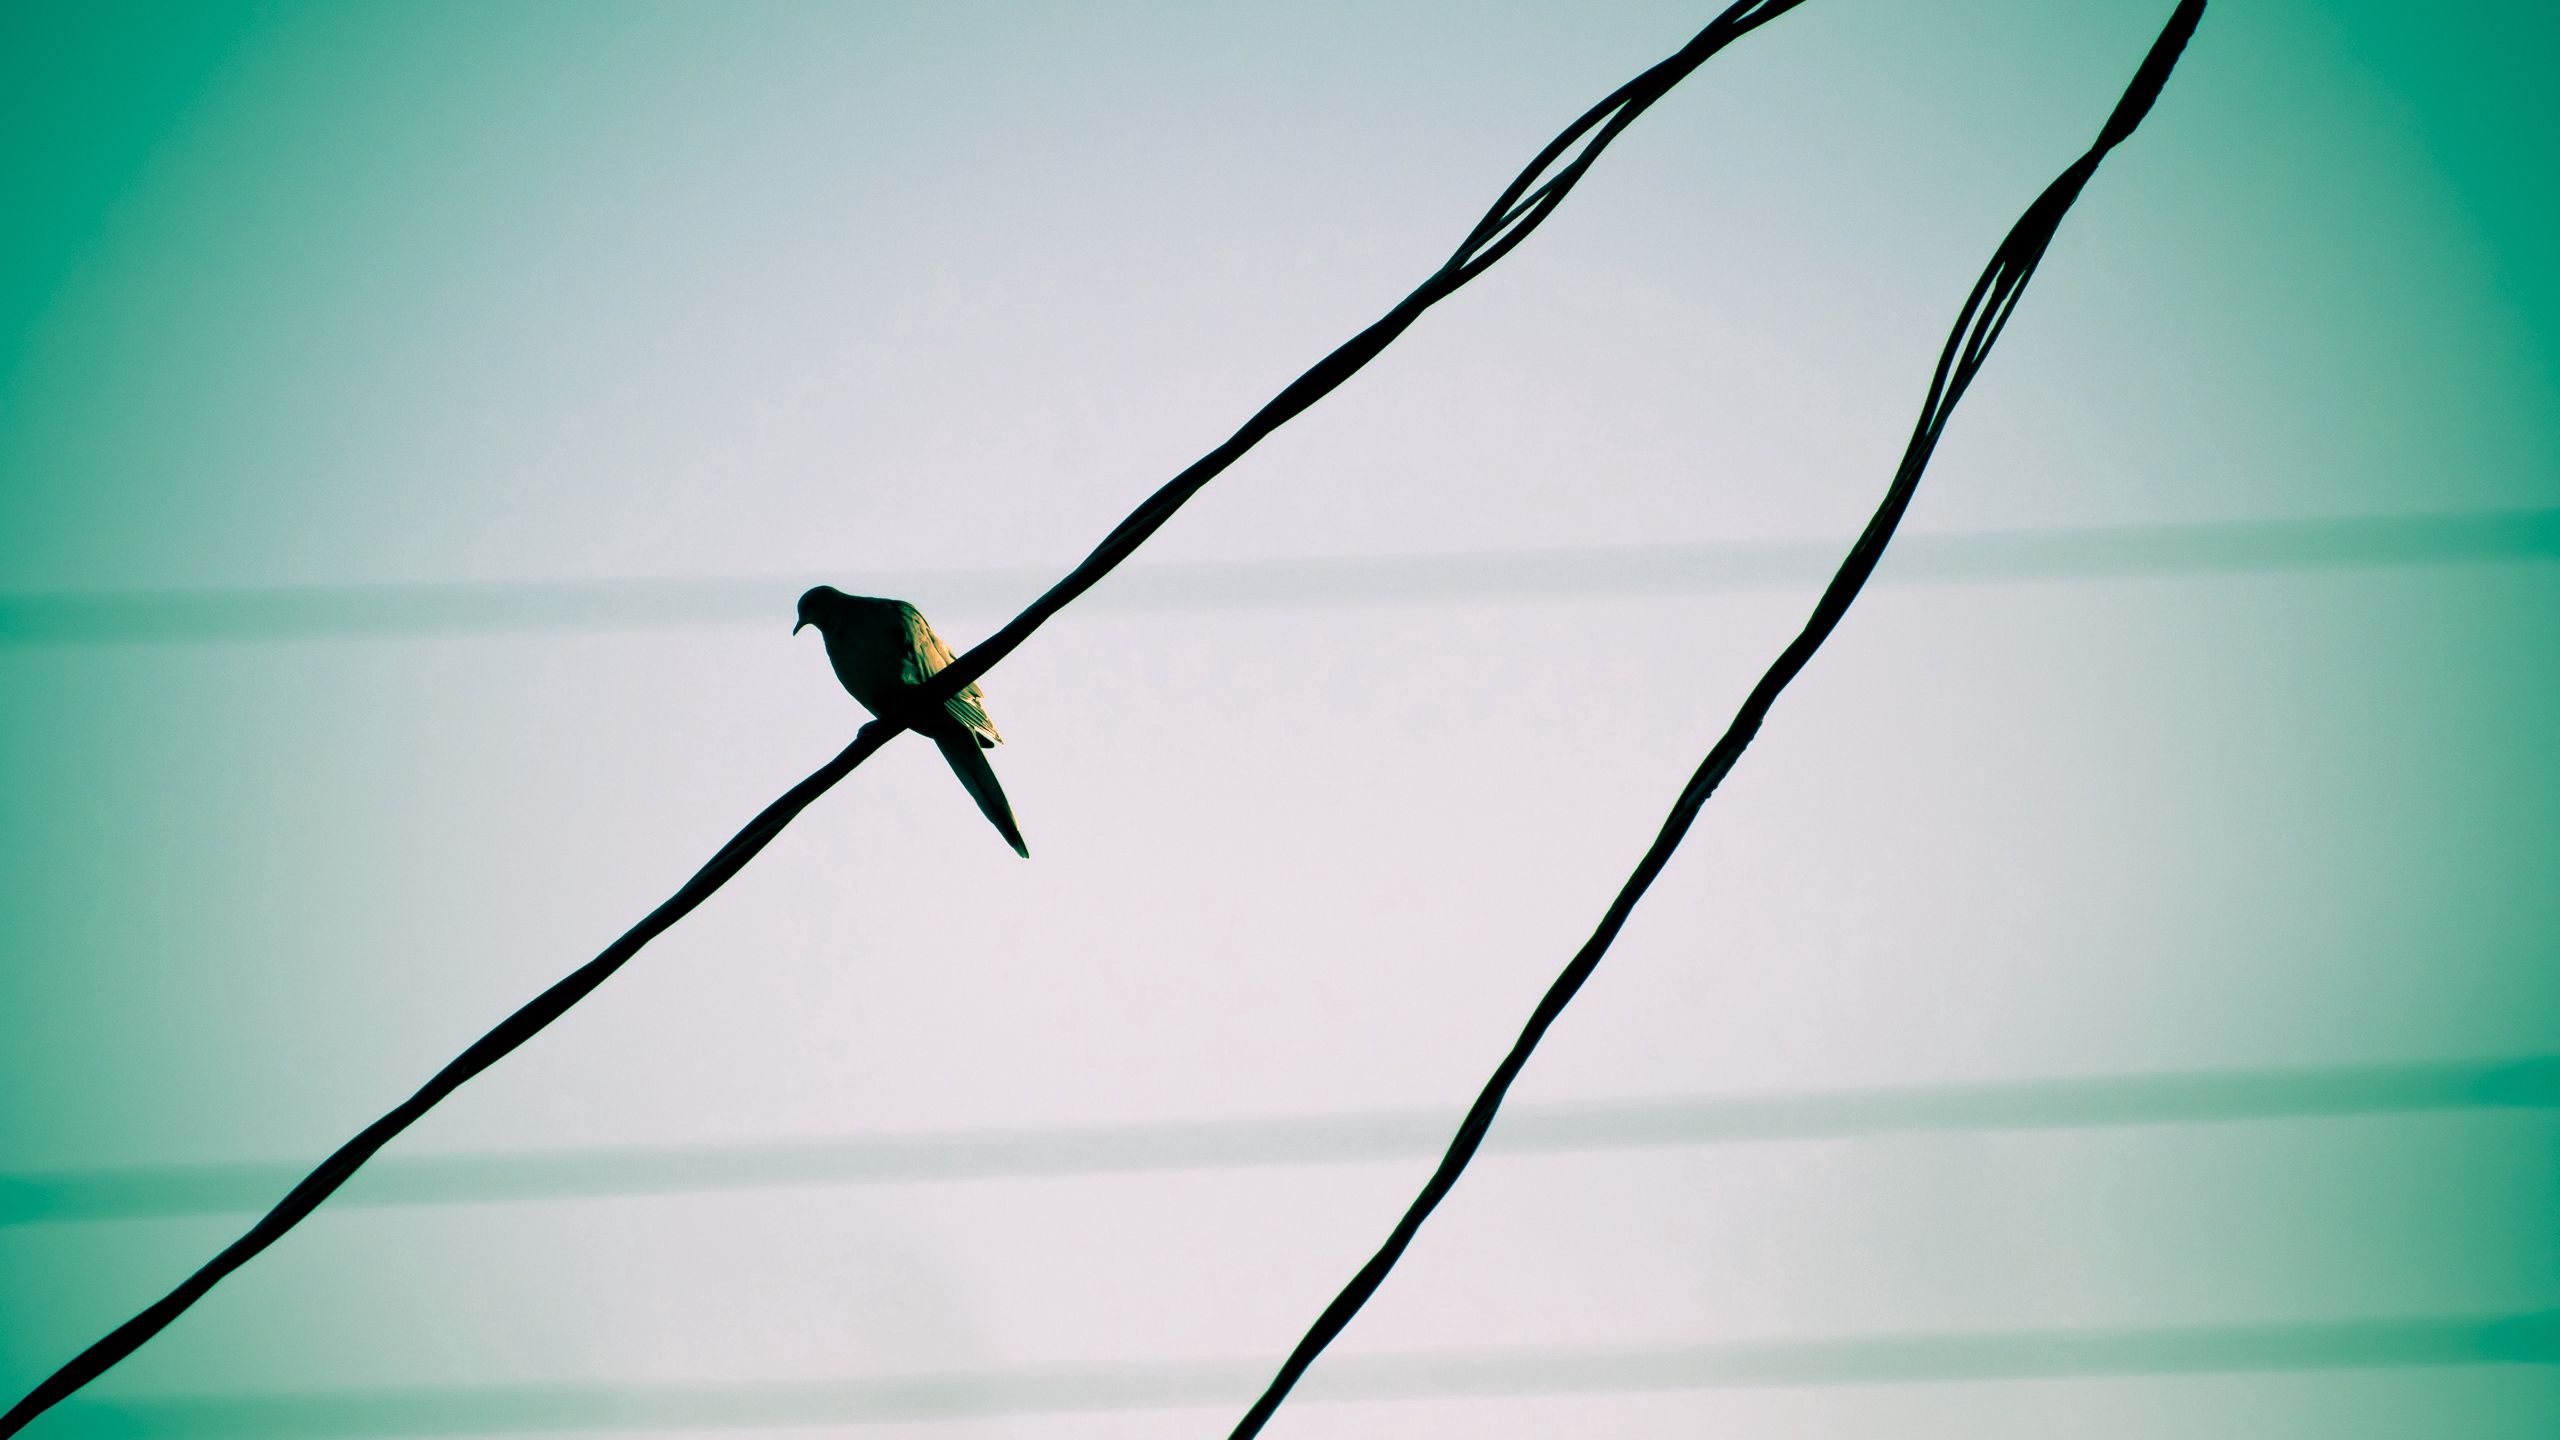 wires, animals, sky, bird, wire, expectation, waiting Full HD